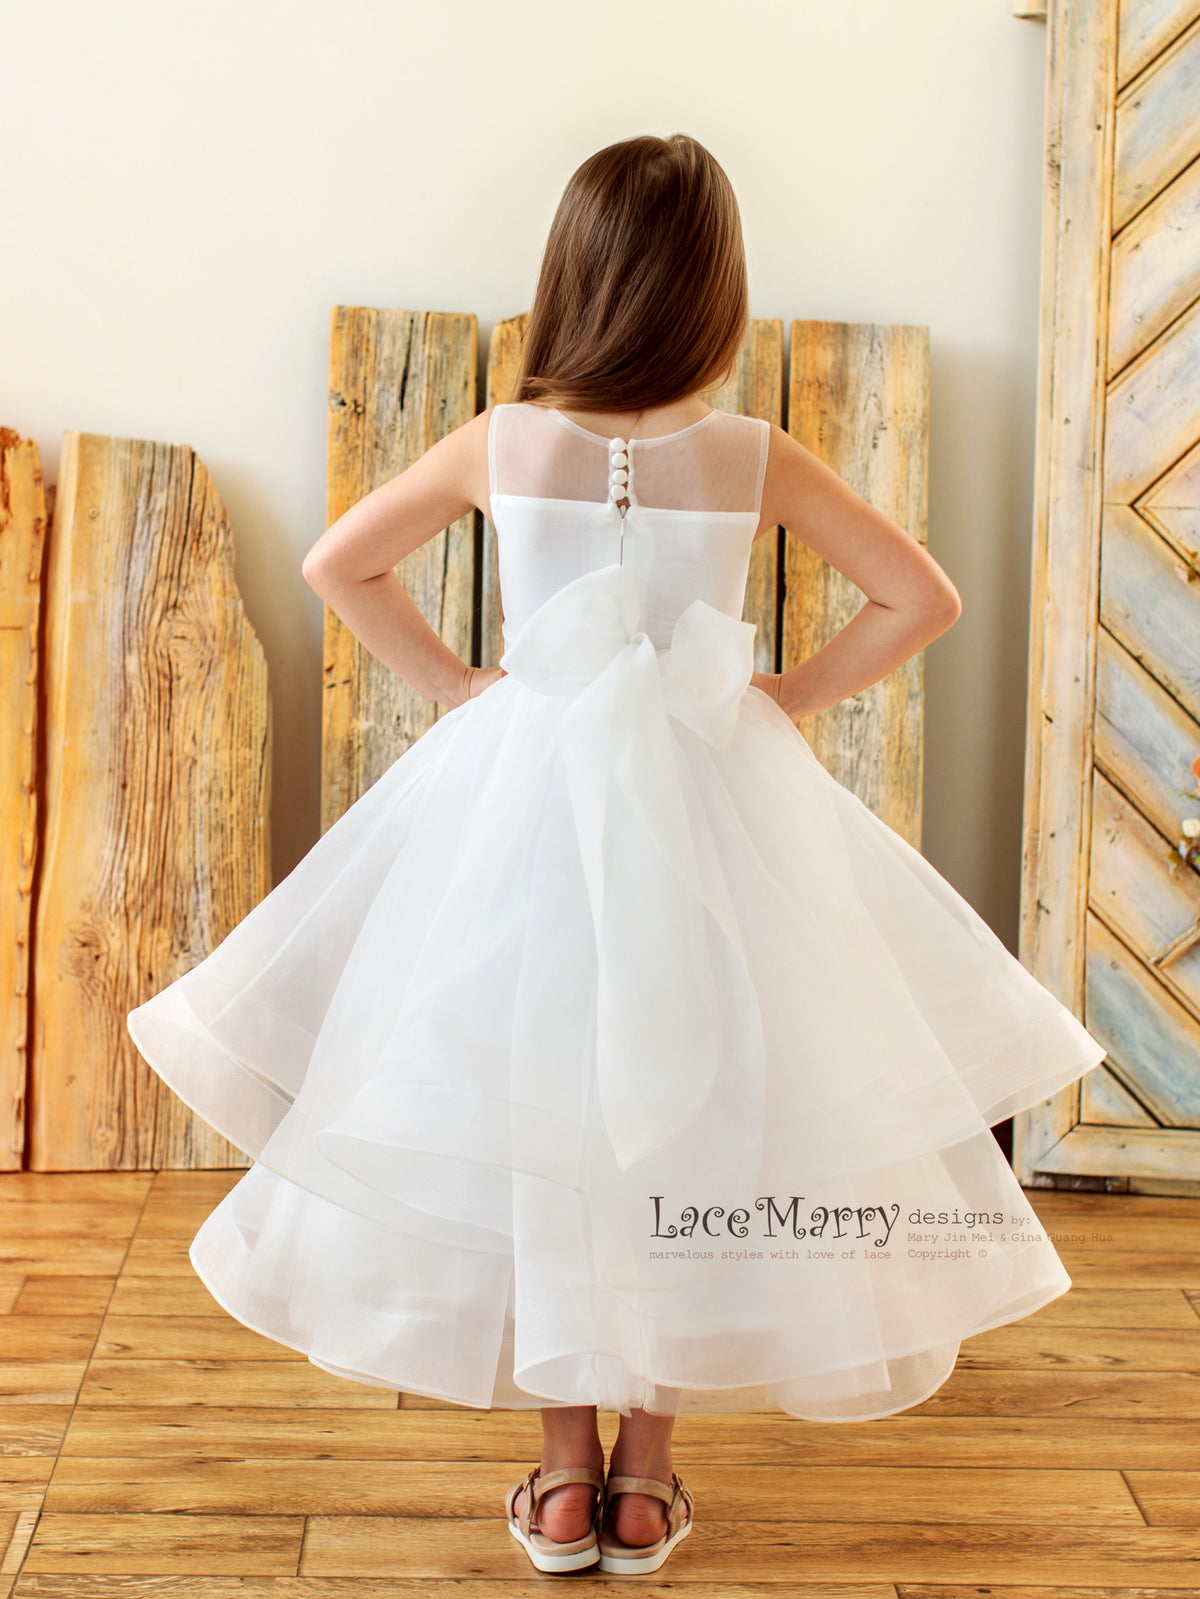 Large Bow and Big Skirt Little Girl Dress